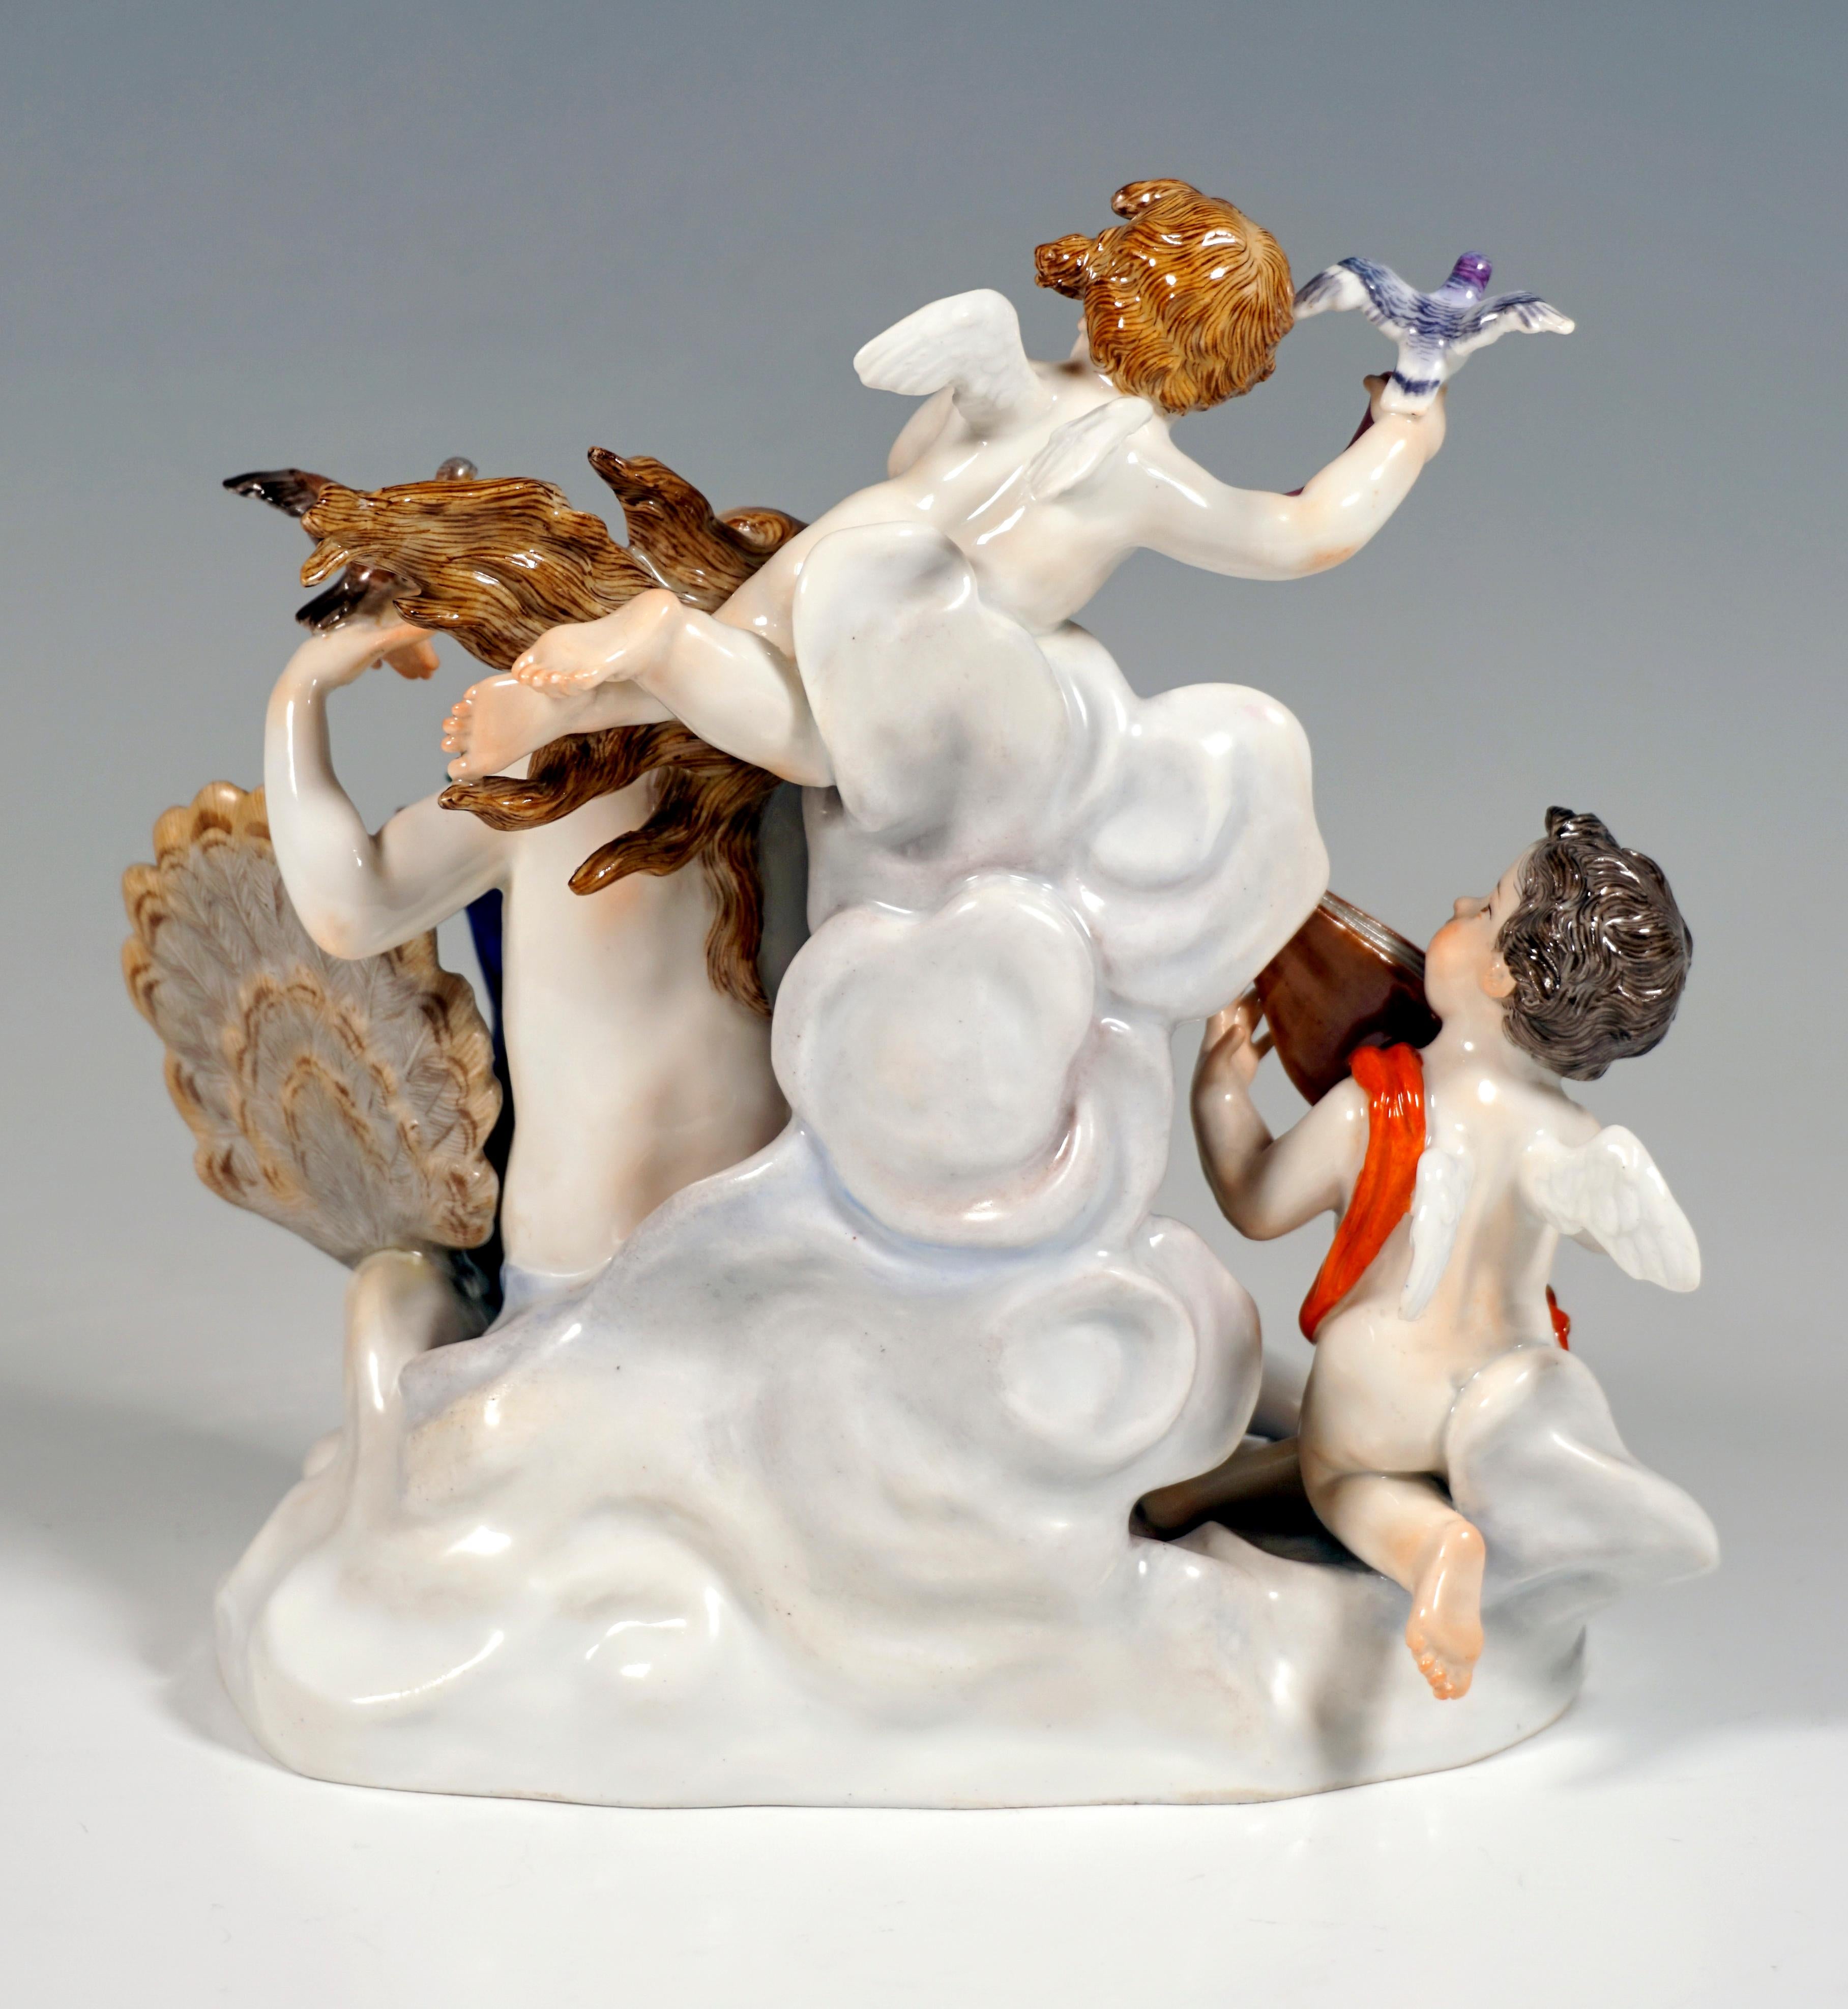 Hand-Crafted Meissen Allegorical Group 'The Air', by J.J. Kaendler, Germany, Around 1850